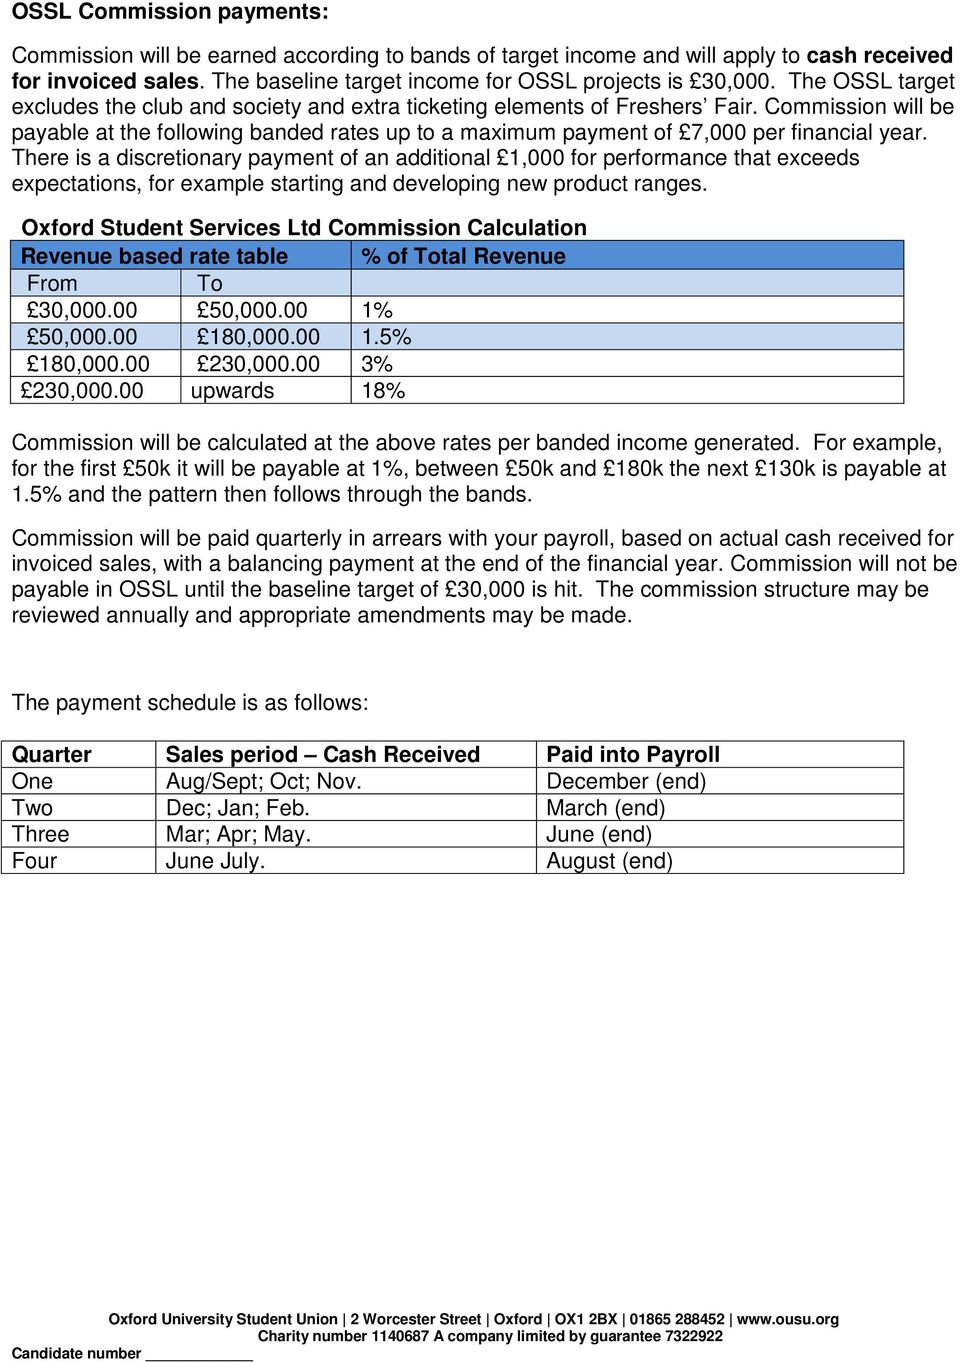 Commission will be payable at the following banded rates up to a maximum payment of 7,000 per financial year.